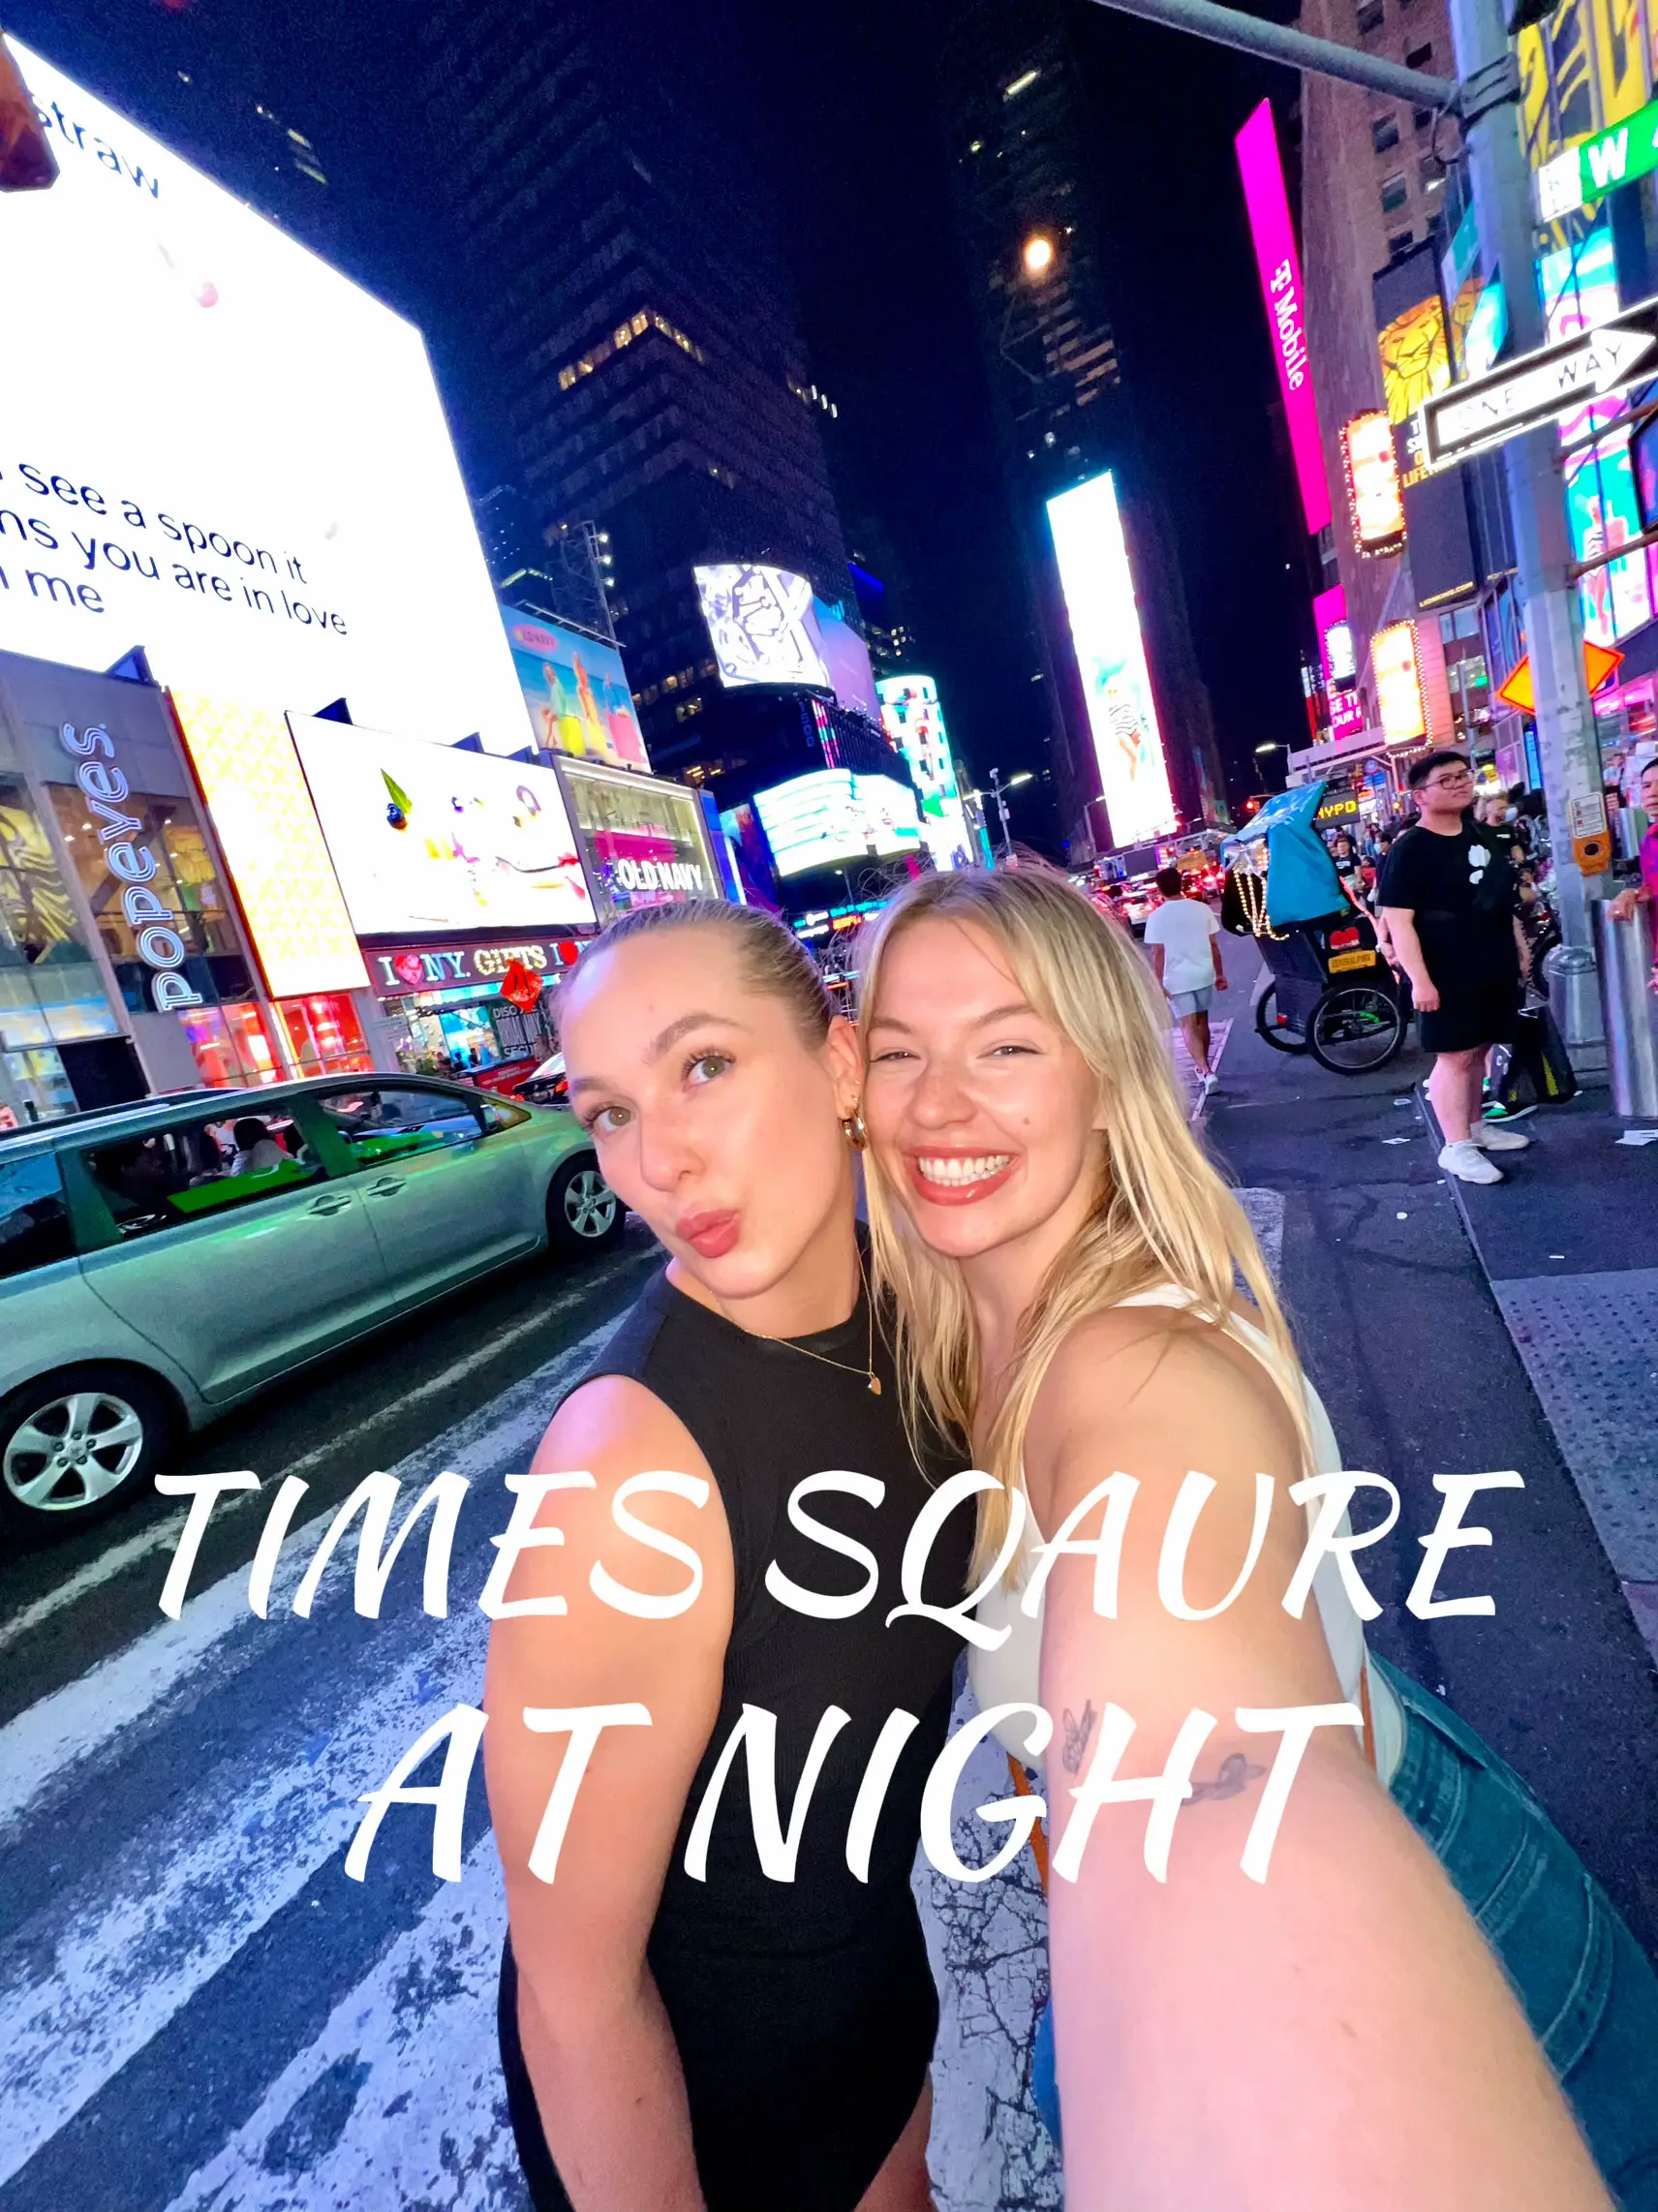  Two women are standing on a sidewalk in front of a building at night. They are posing for a picture and are smiling.